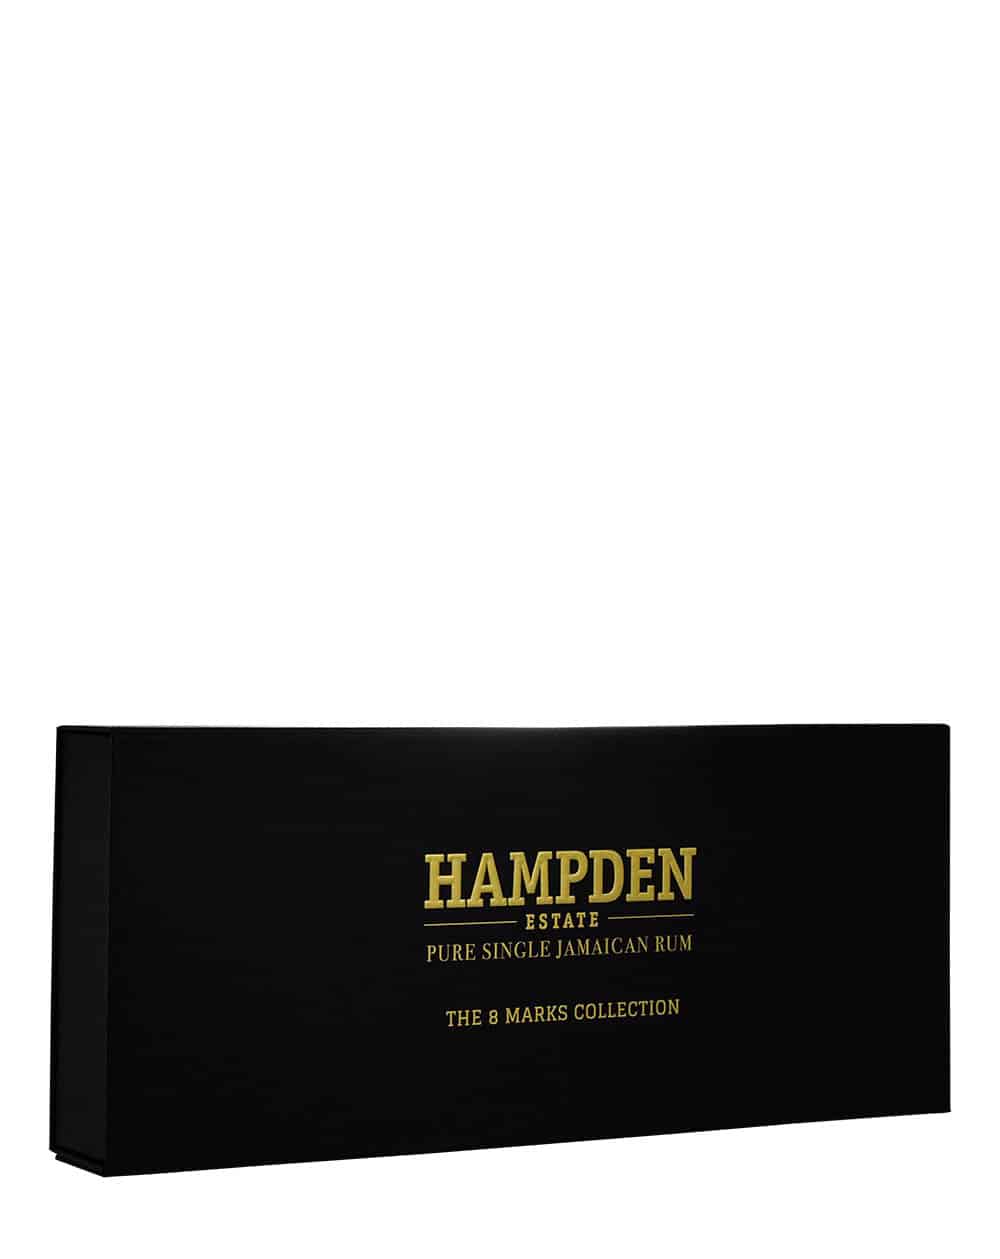 Hampden Estate The 8 Marks Collection Jamaican Rum Box Front Must Have Malts MHM